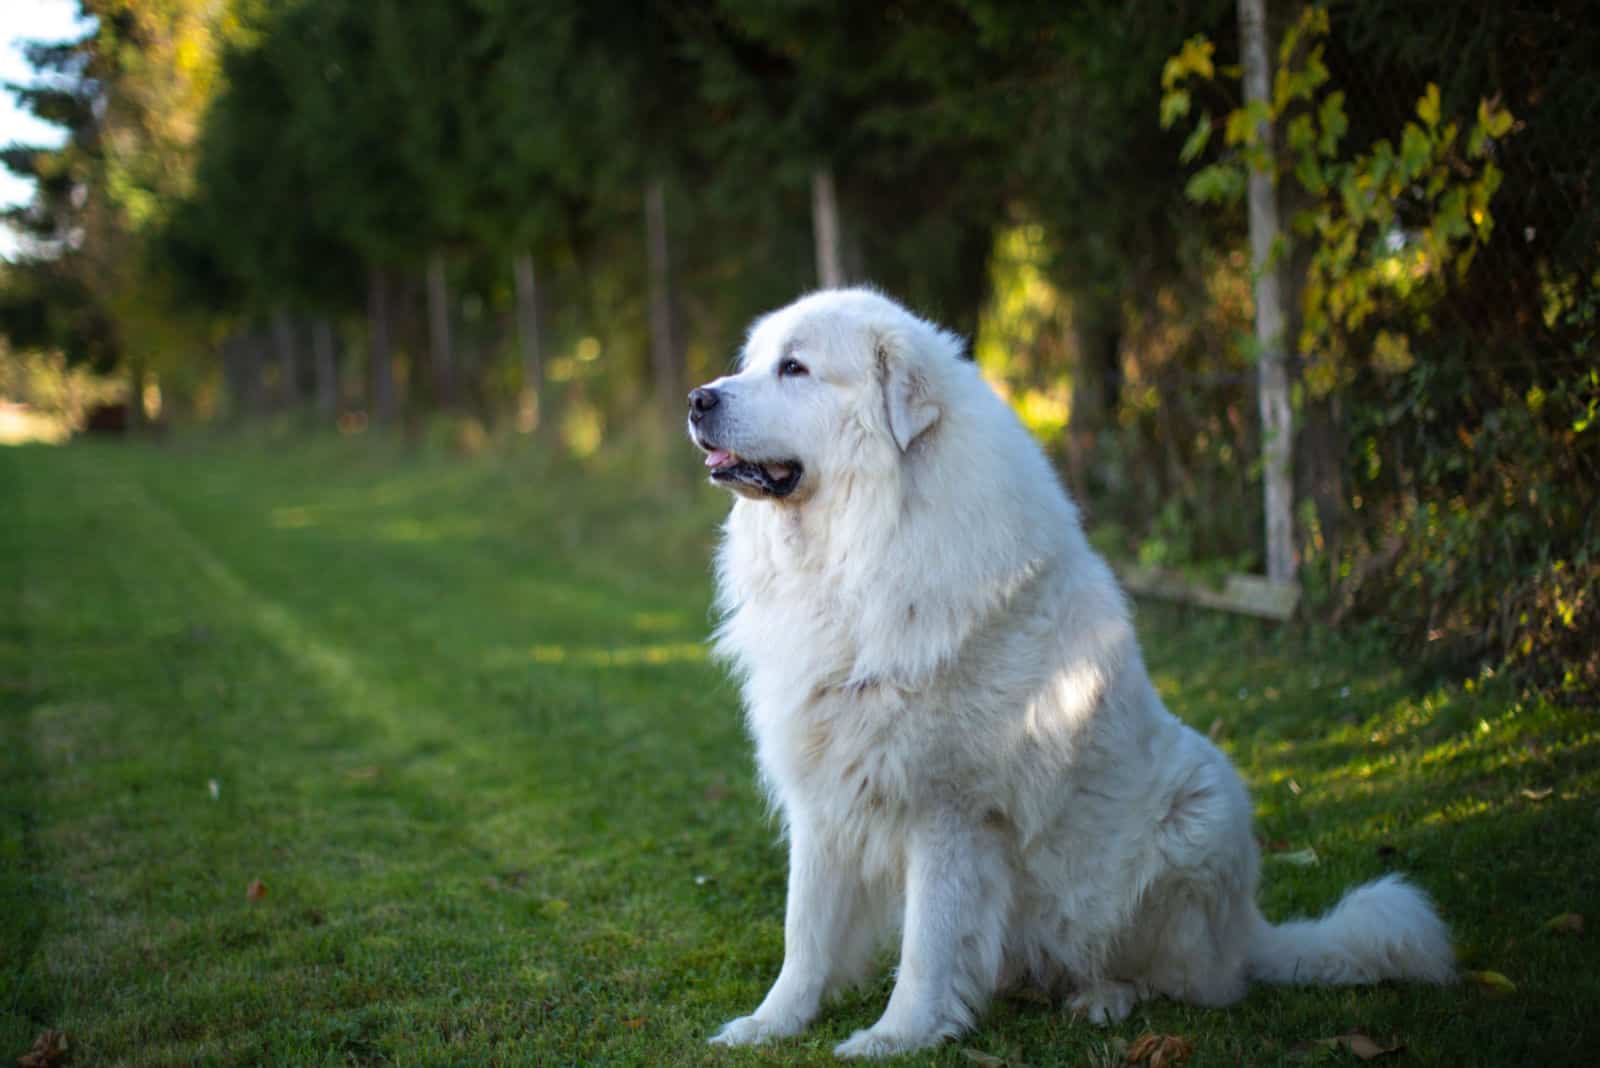 Great Pyrenees is sitting on the grass